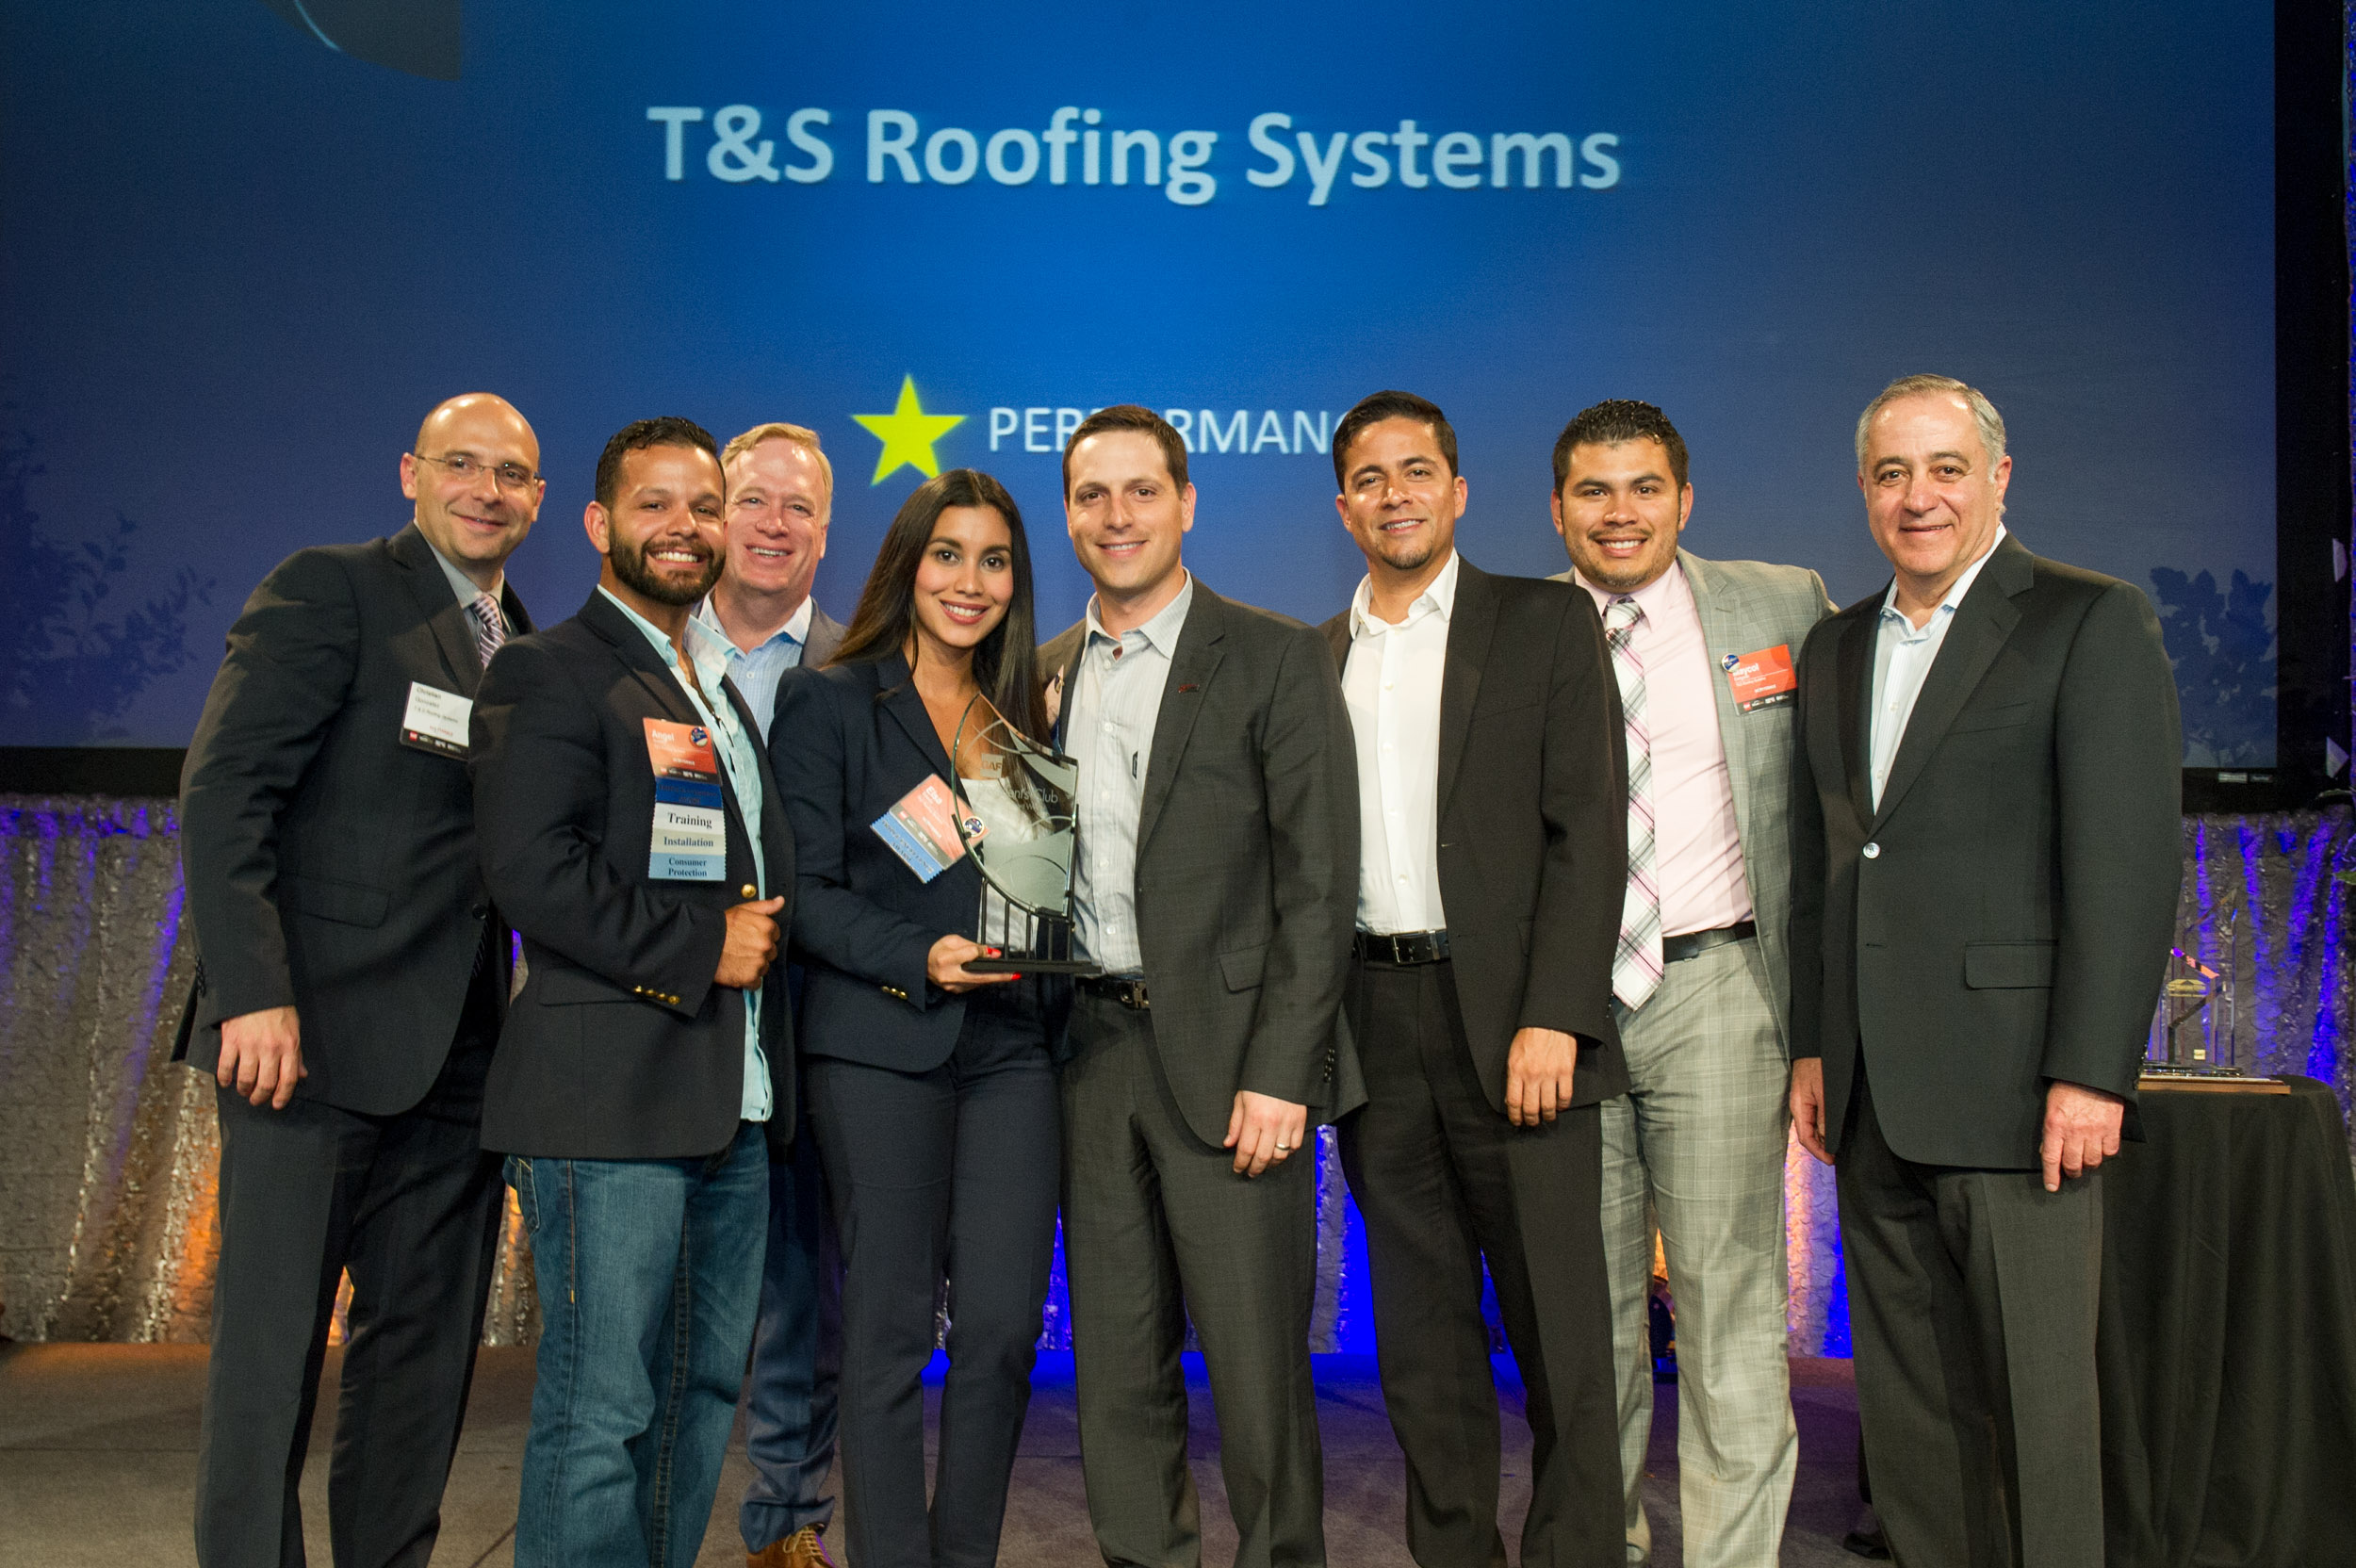 Florida Roofer Receives Residential Roofing Top Honor